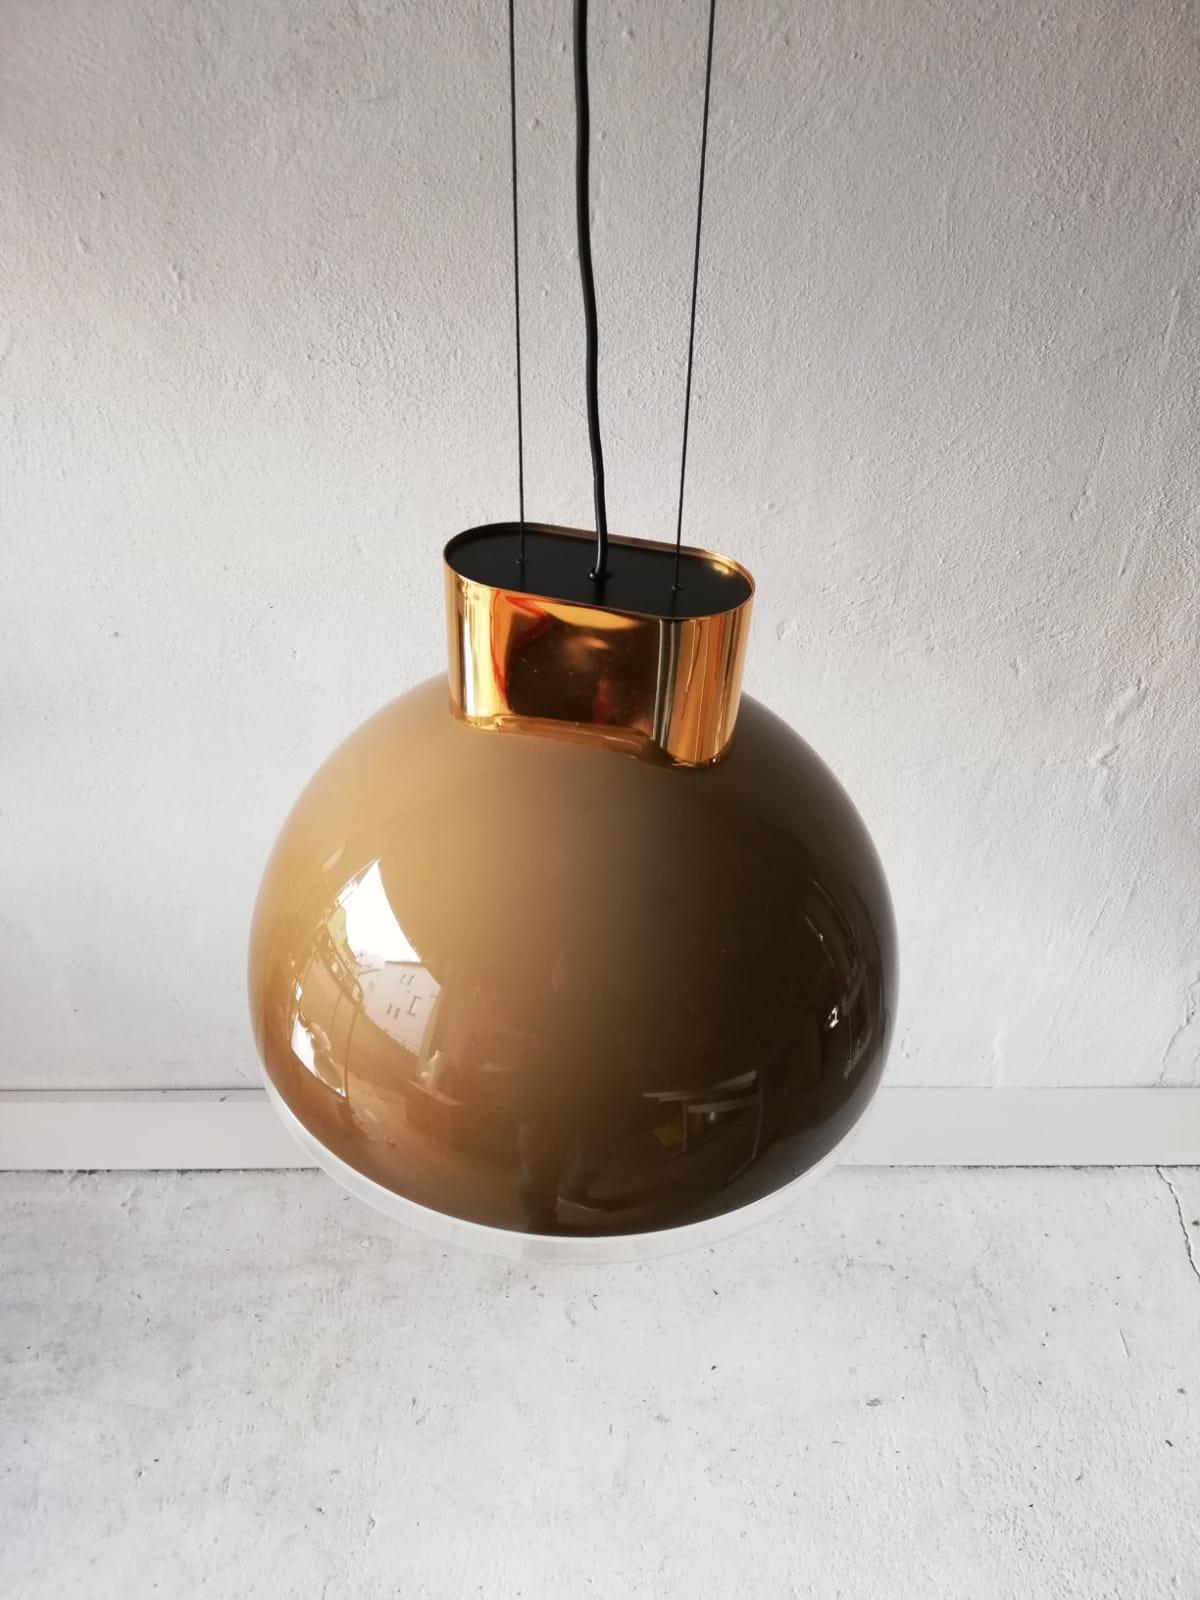 Caramel round glass pendant lamp by Staff, 1980s Germany

Very beautiful, heavy and rare design pendant lamp.

Lampshade is in very good vintage condition.

This lamp works with E27 light bulb.
Wired and suitable to use with 220V and 110V for